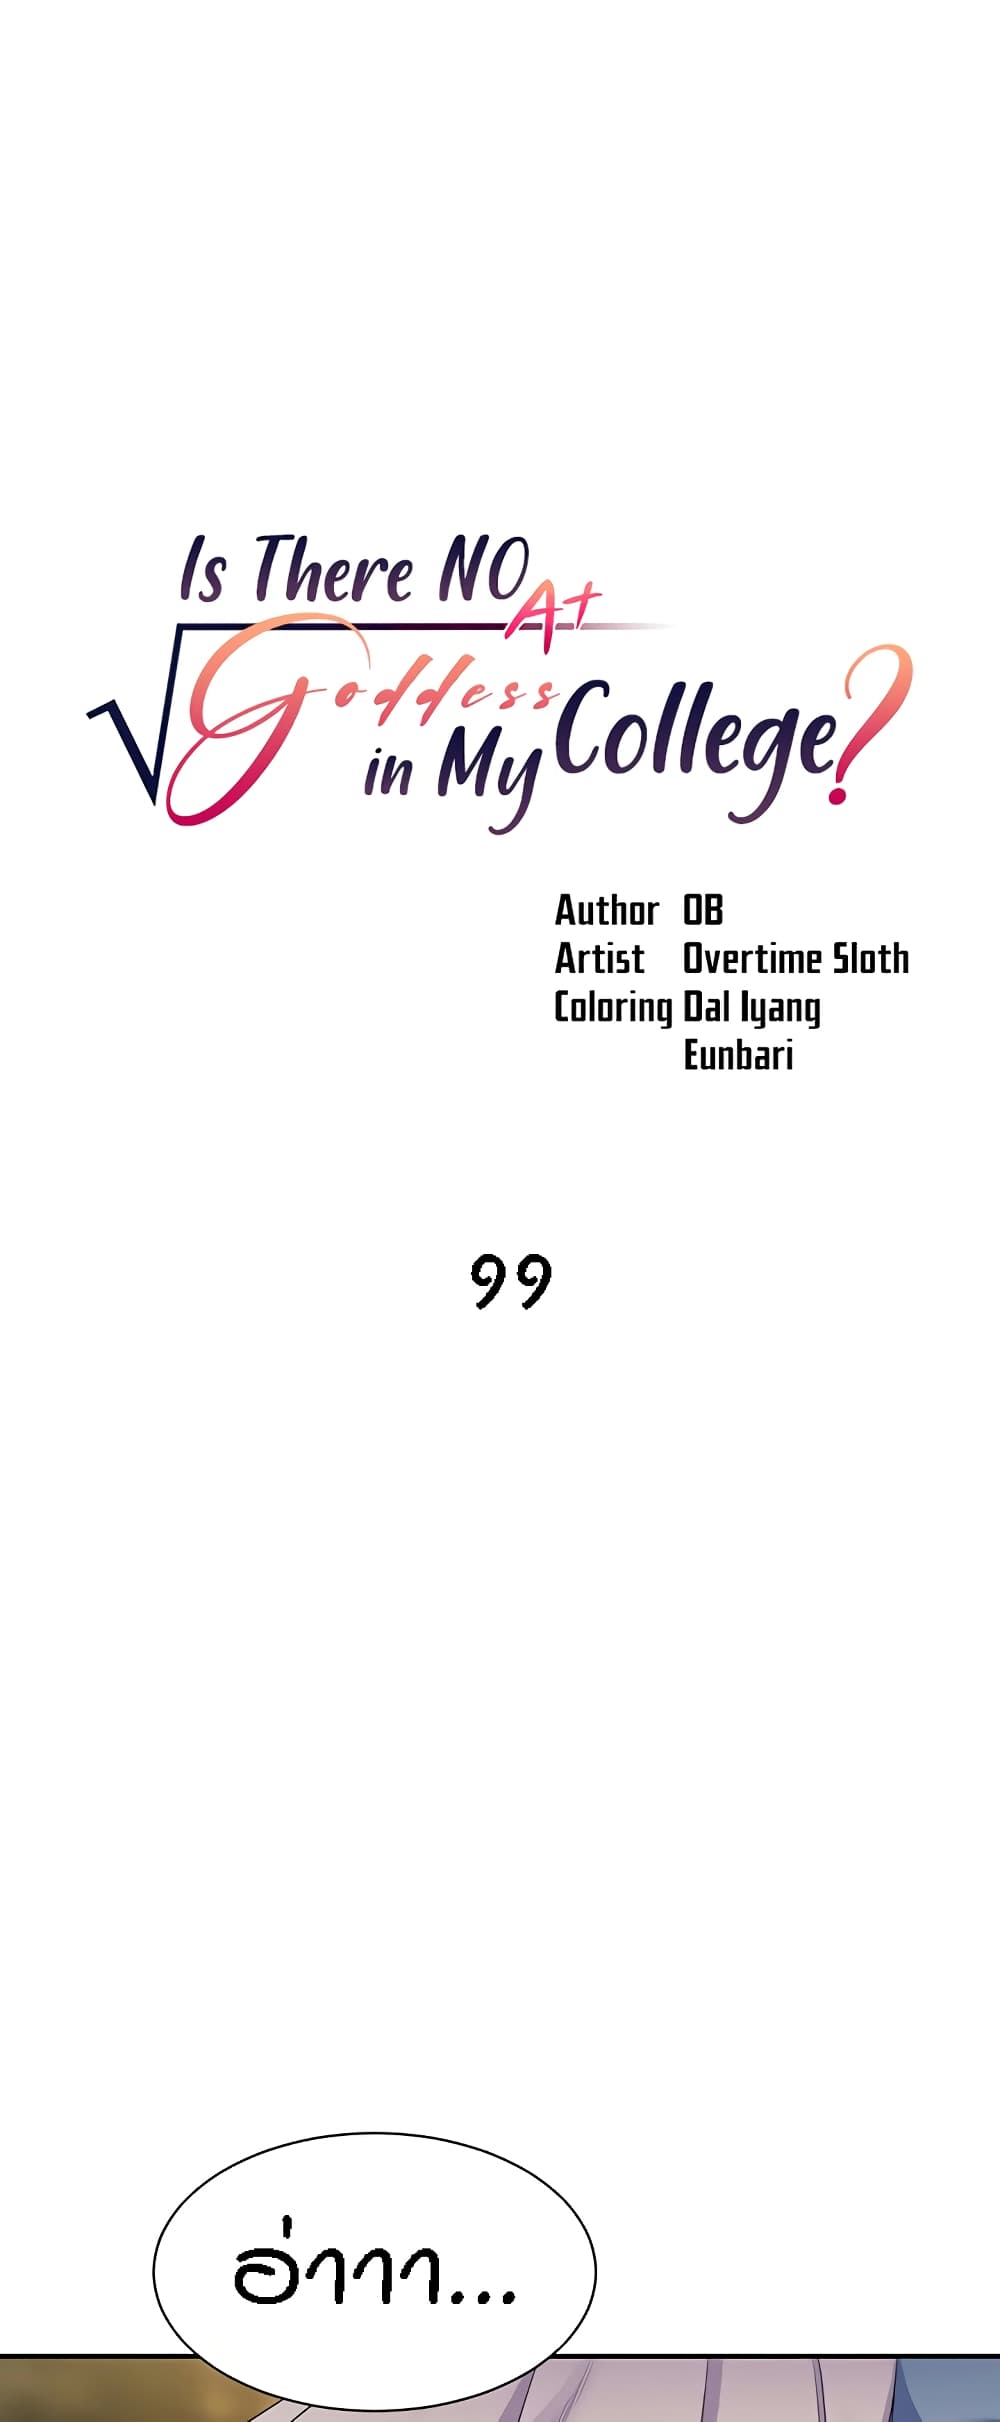 Is There No Goddess in My College? 99-99